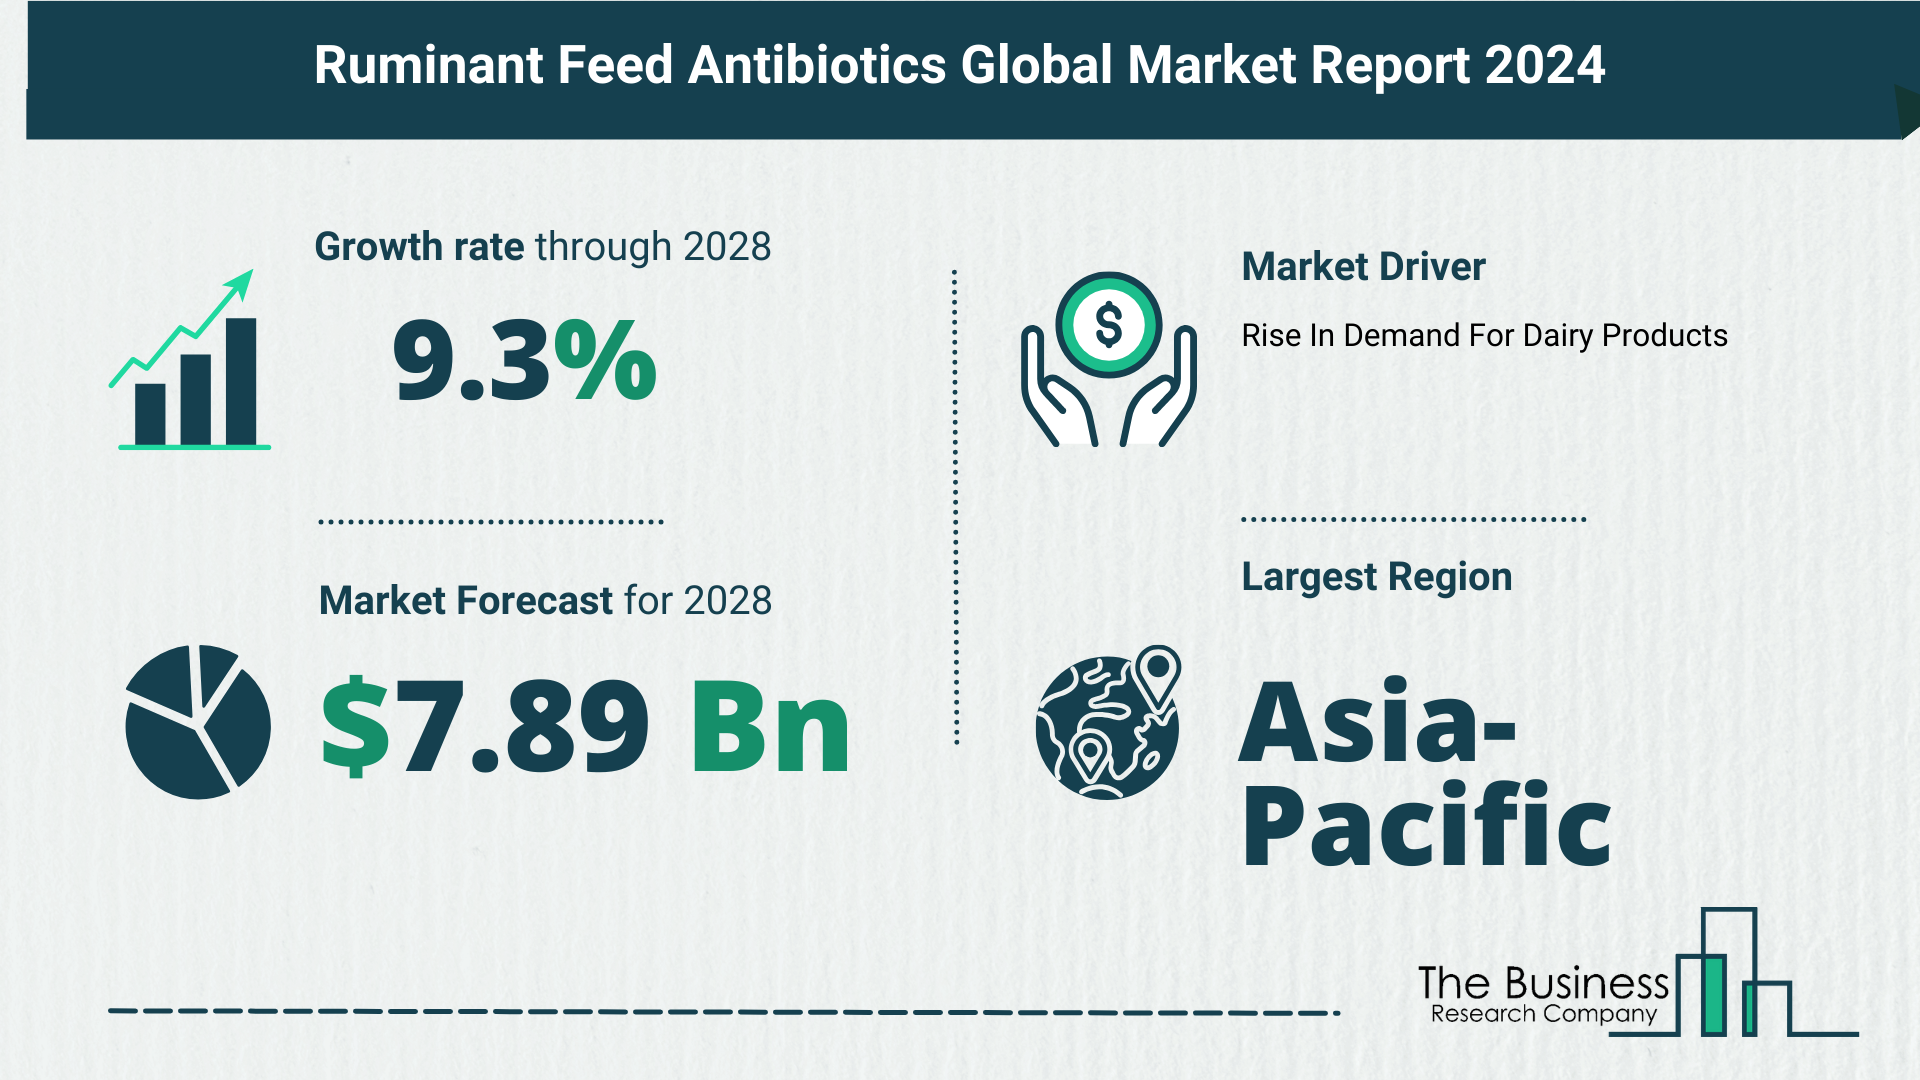 How Is The Ruminant Feed Antibiotics Market Expected To Grow Through 2024-2033